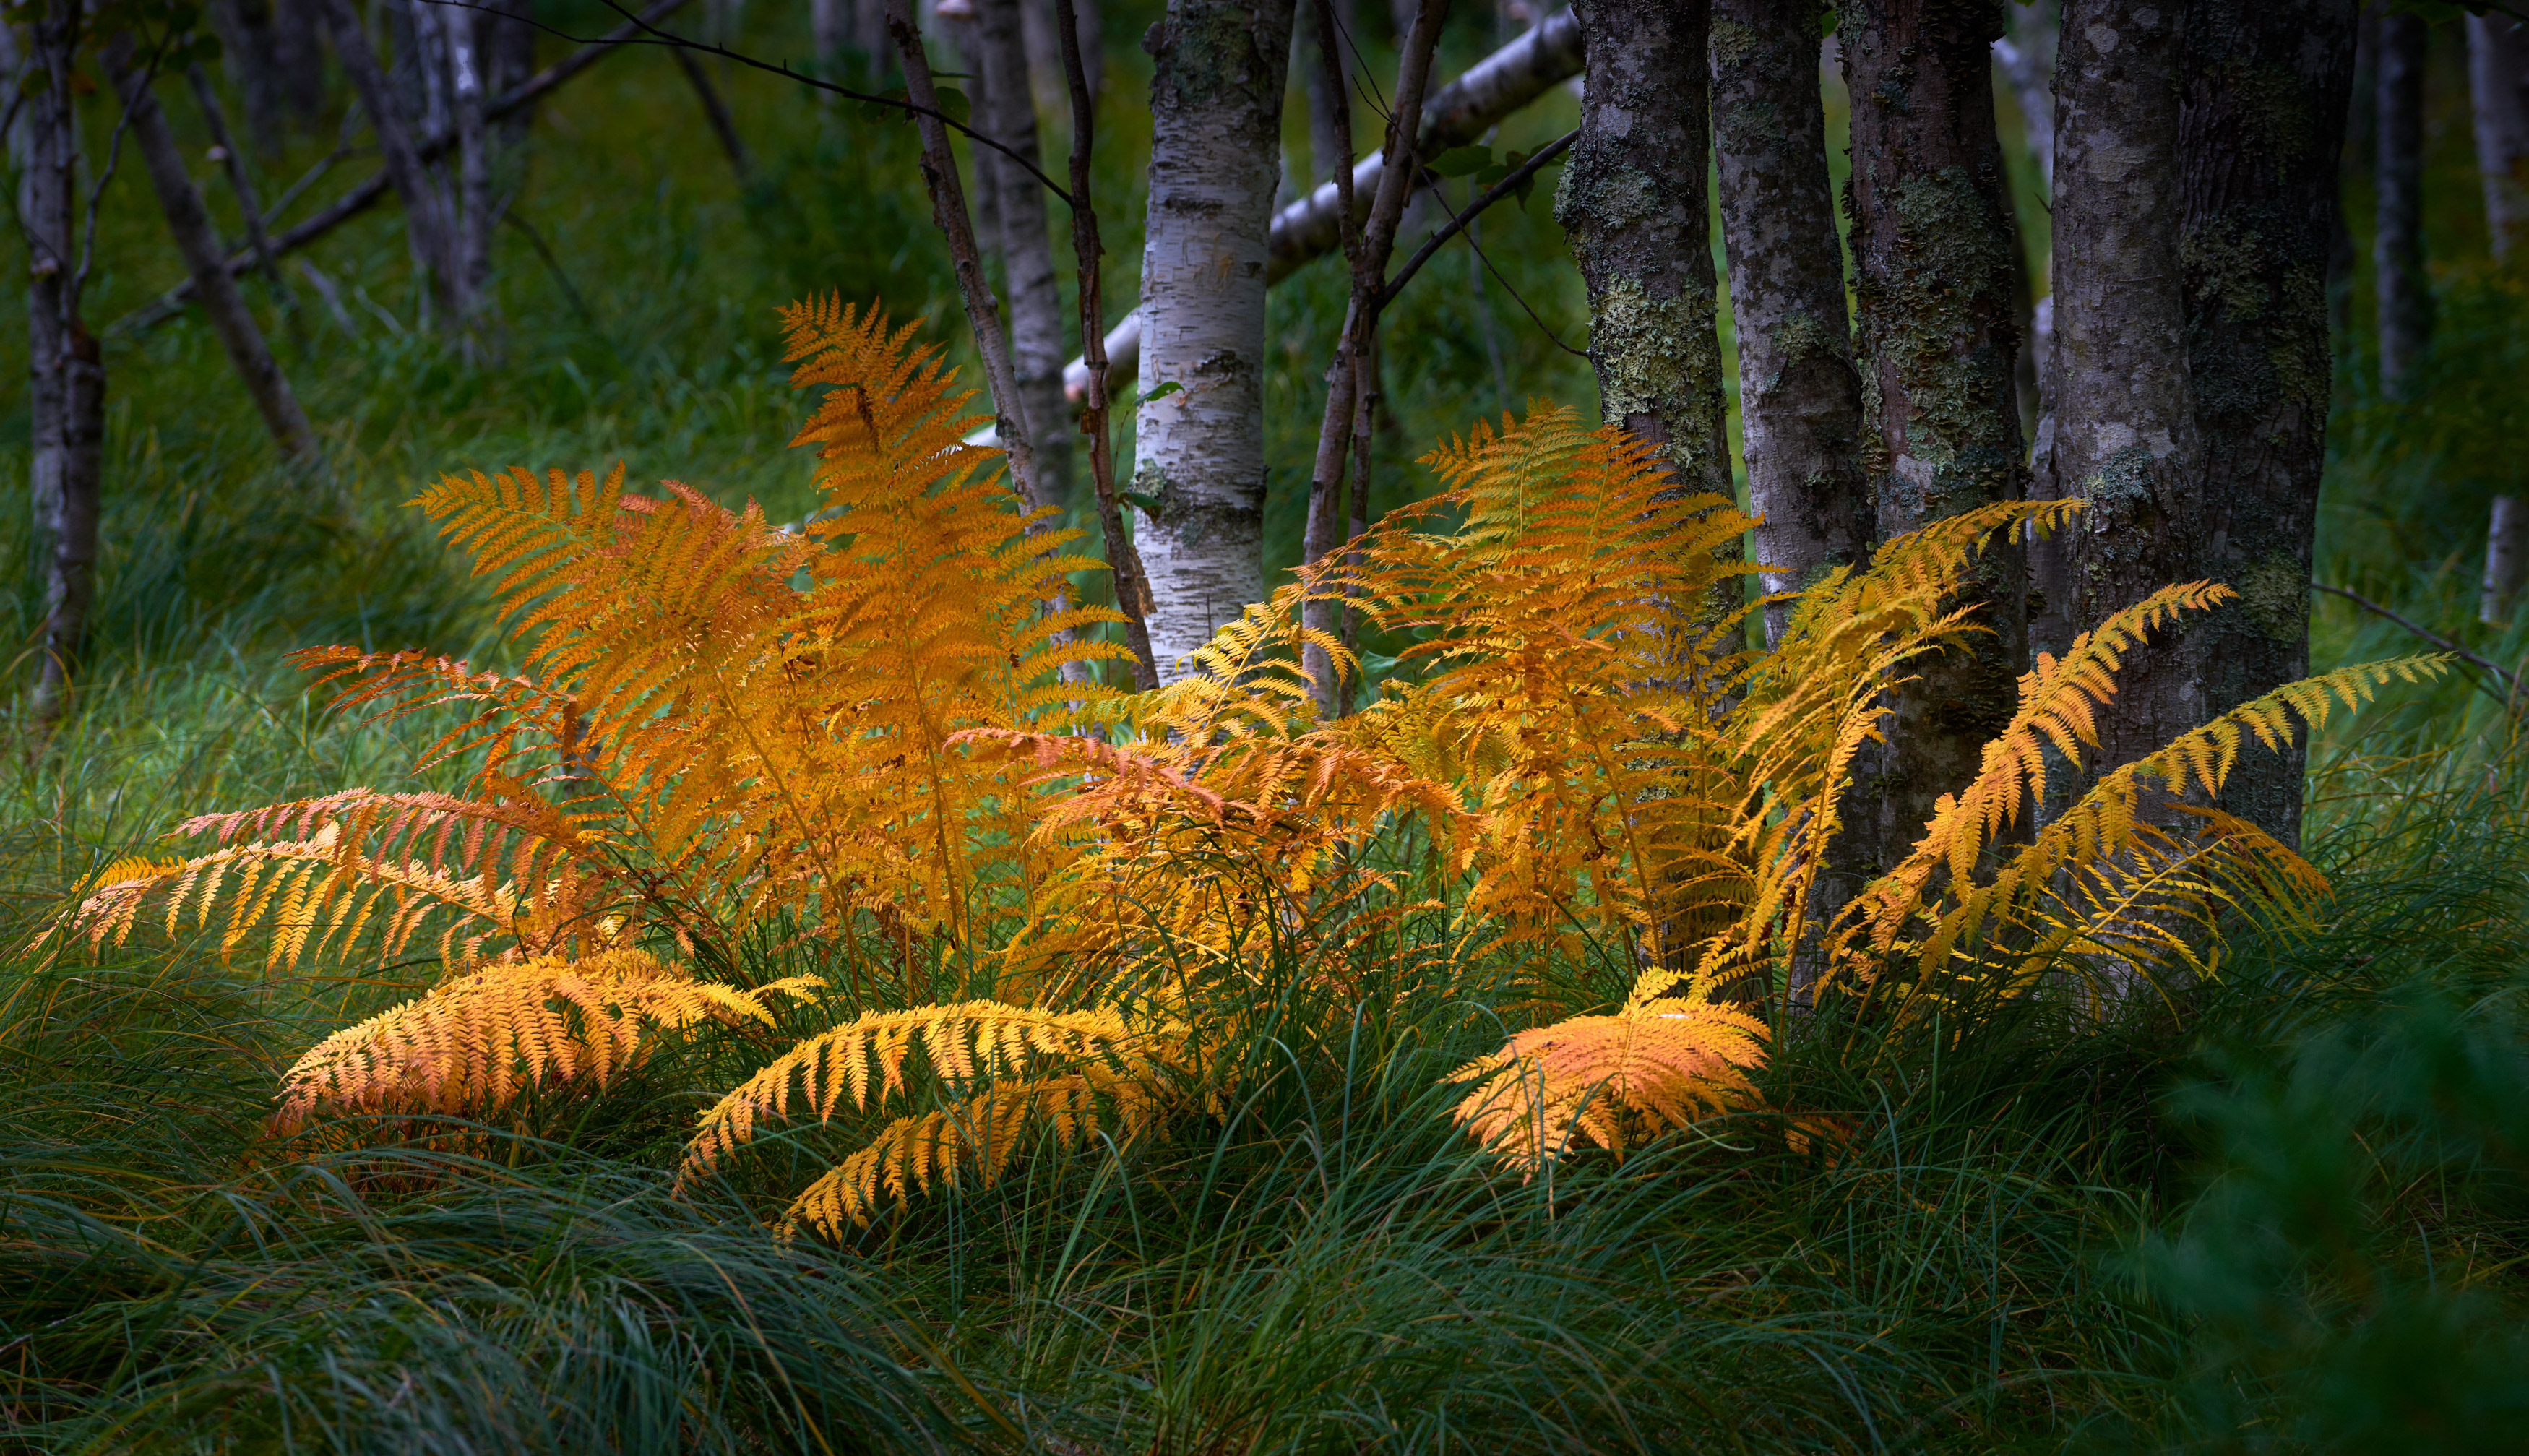 Ferns and Birches, Acadia National Park